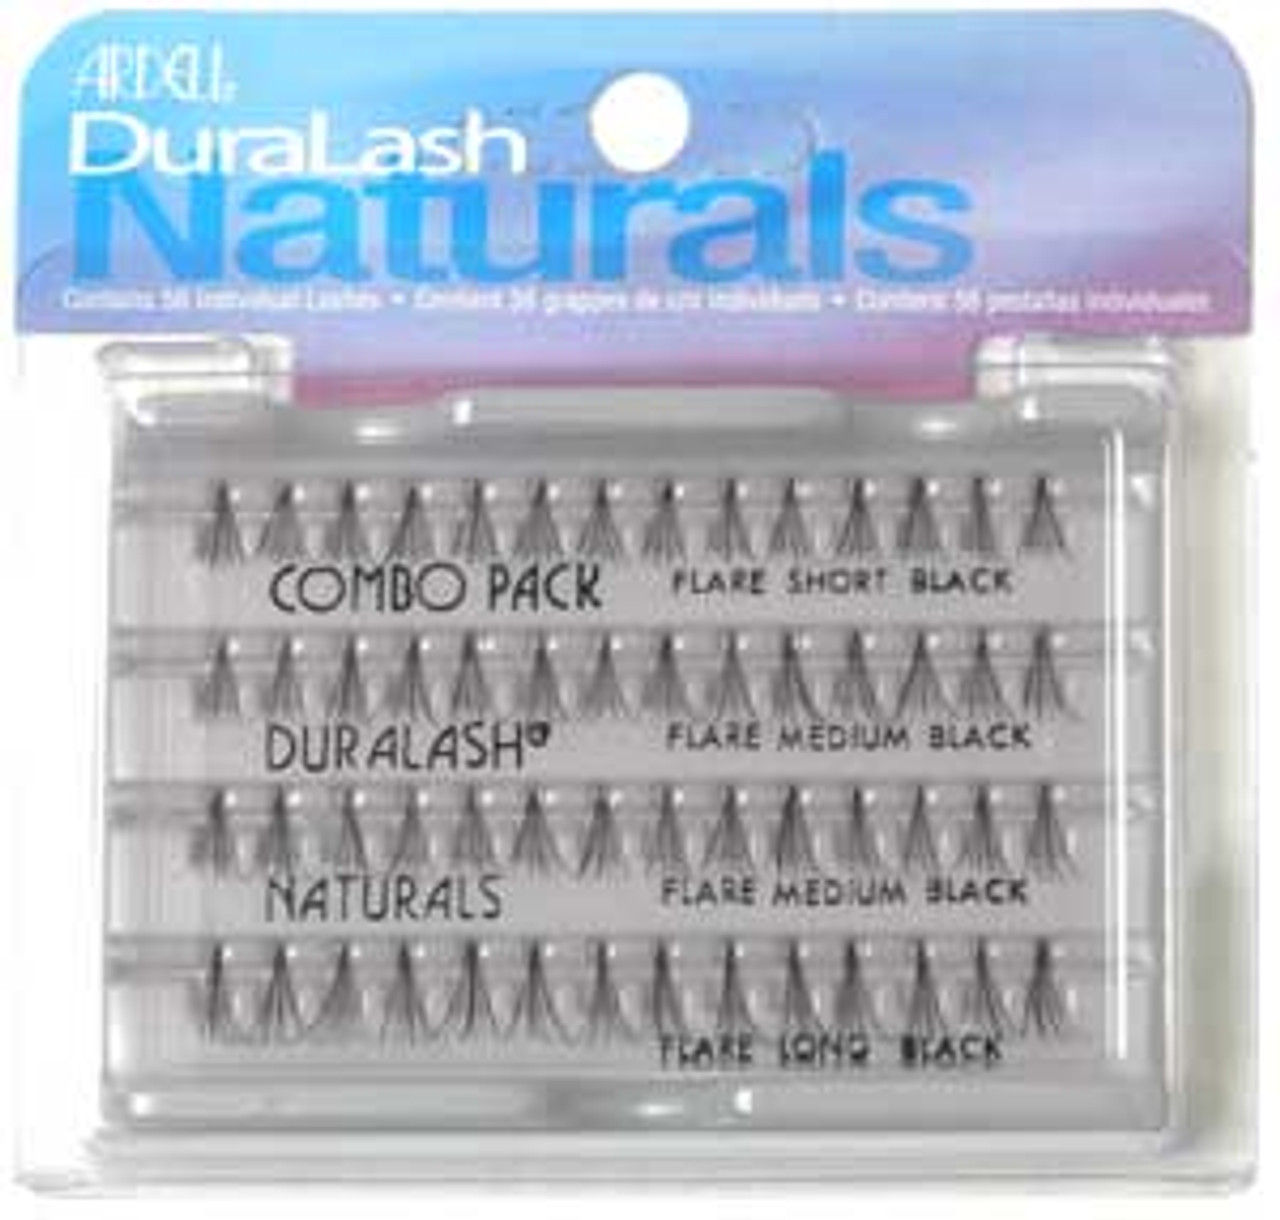 Ardell DuraLash Naturals Combo Pack - Black